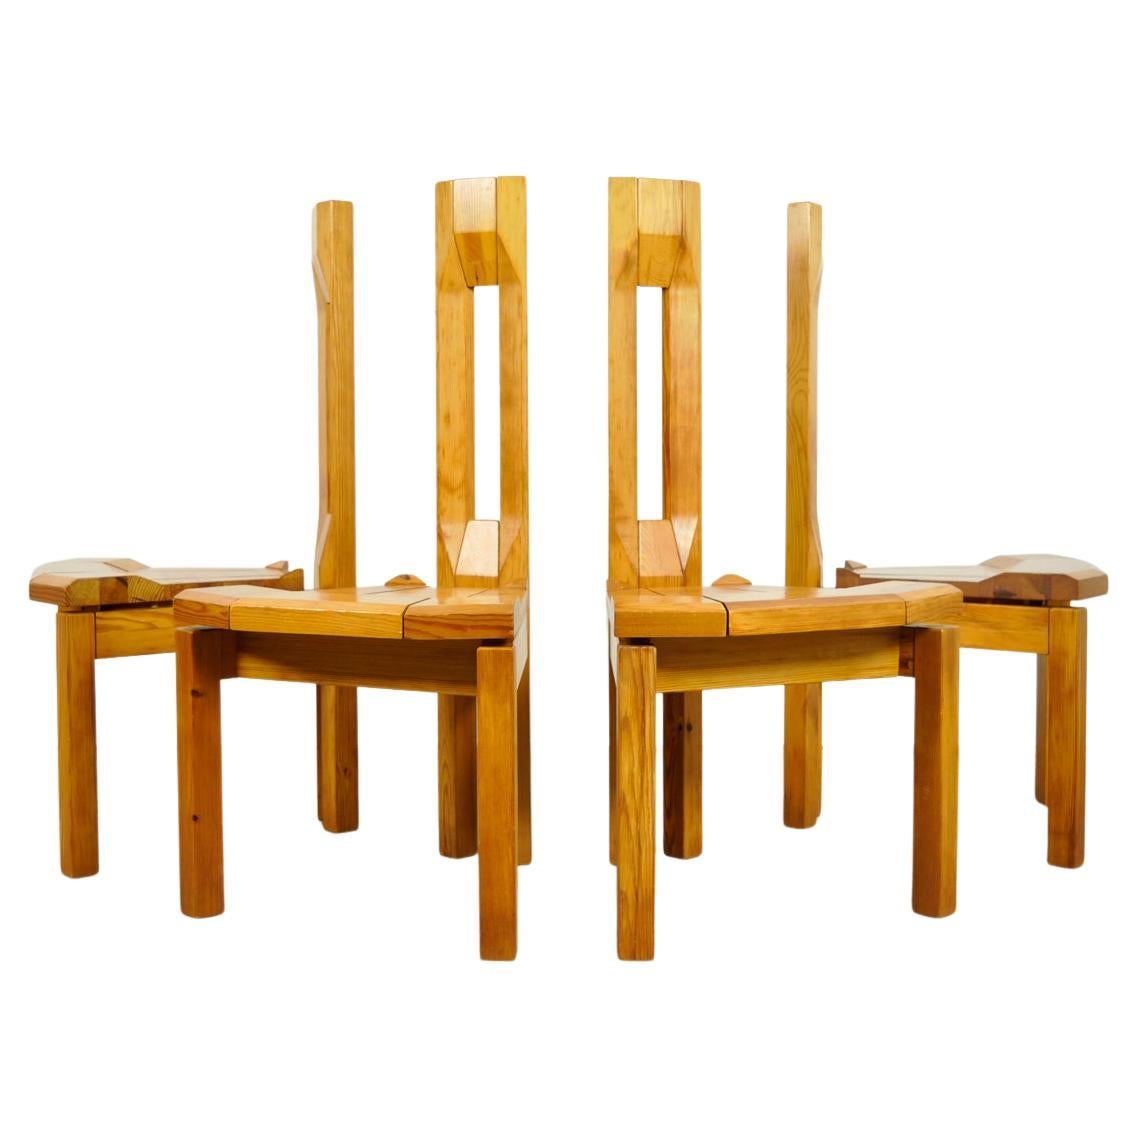 Pine Dining Chairs “Rantasipi” by Arnold Lerber for Laukaan Puu, Finland, 1970s